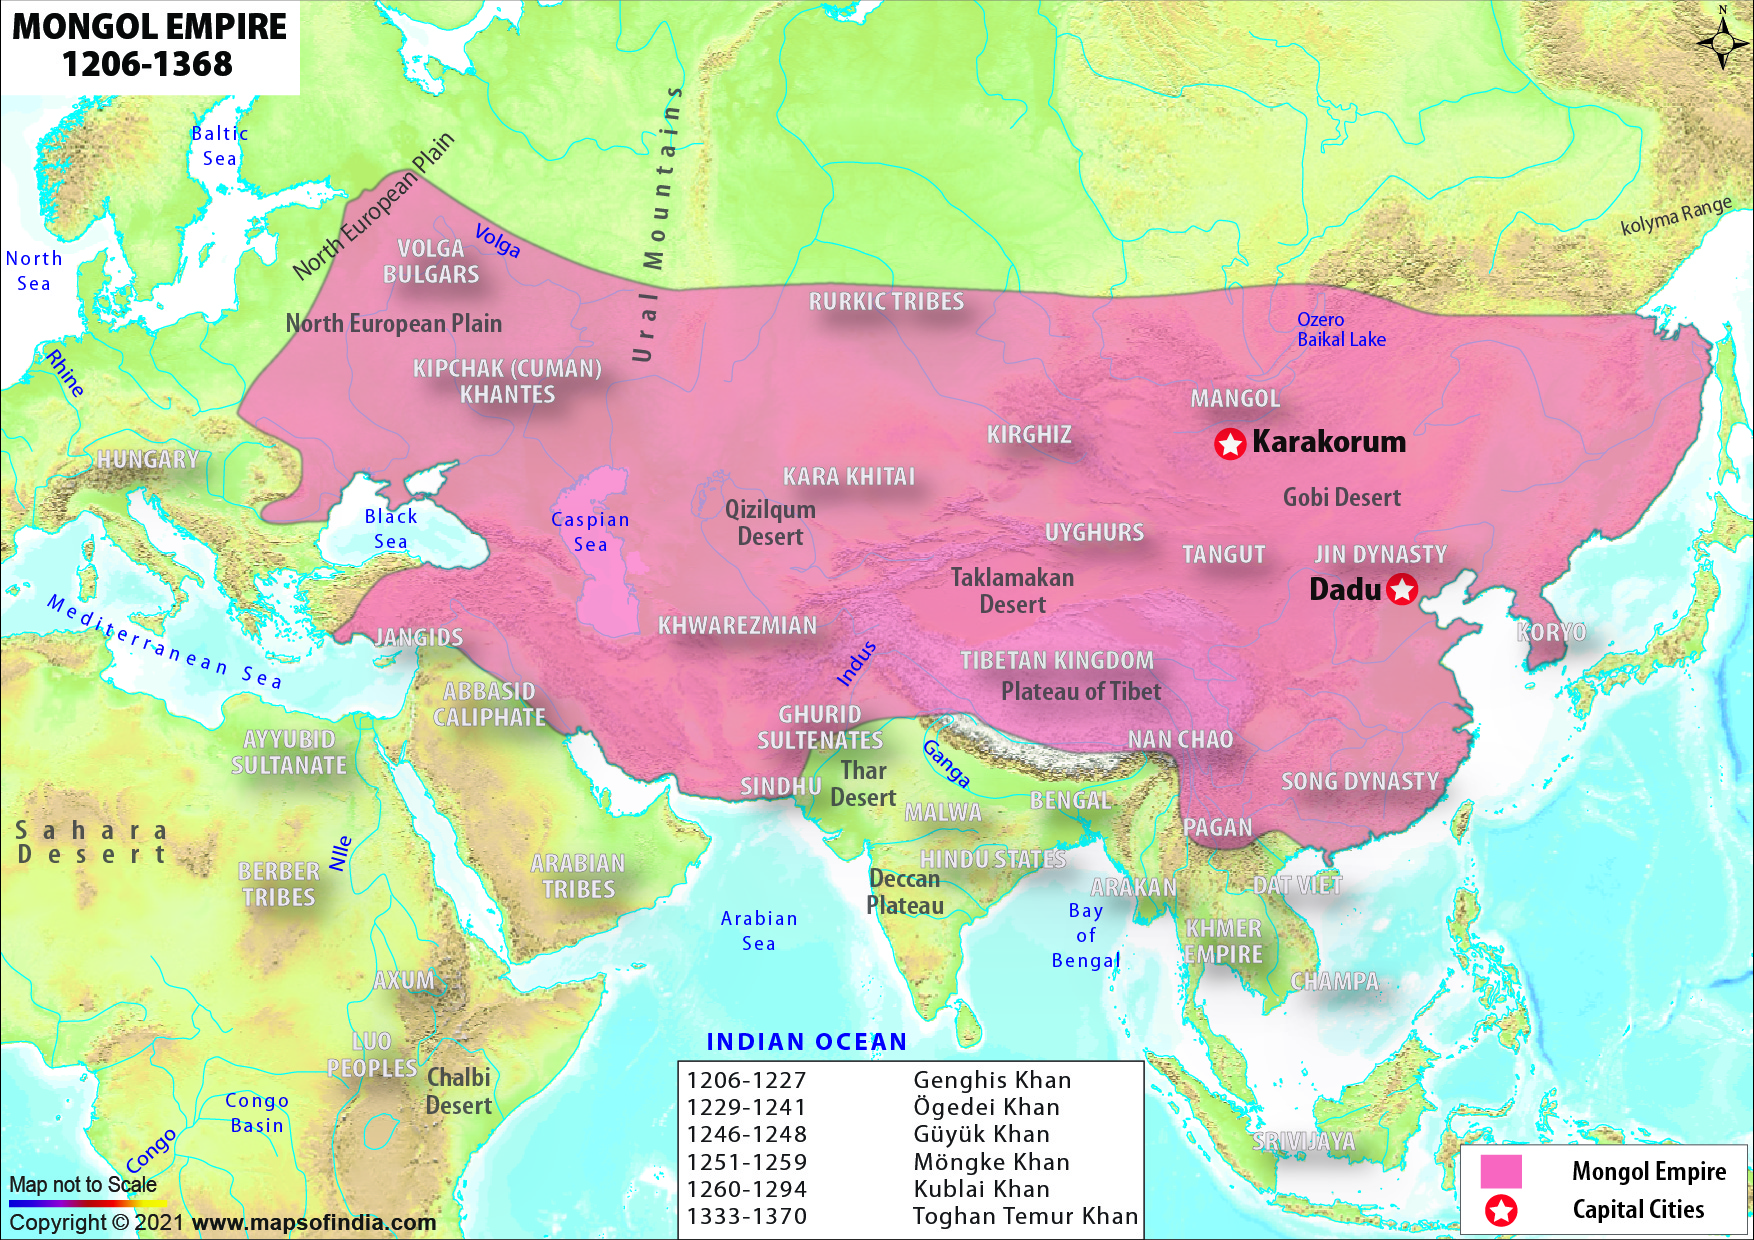 genghis khan empire map Mongol Dynasty Map Mongol Empire Khan Dynasty genghis khan empire map